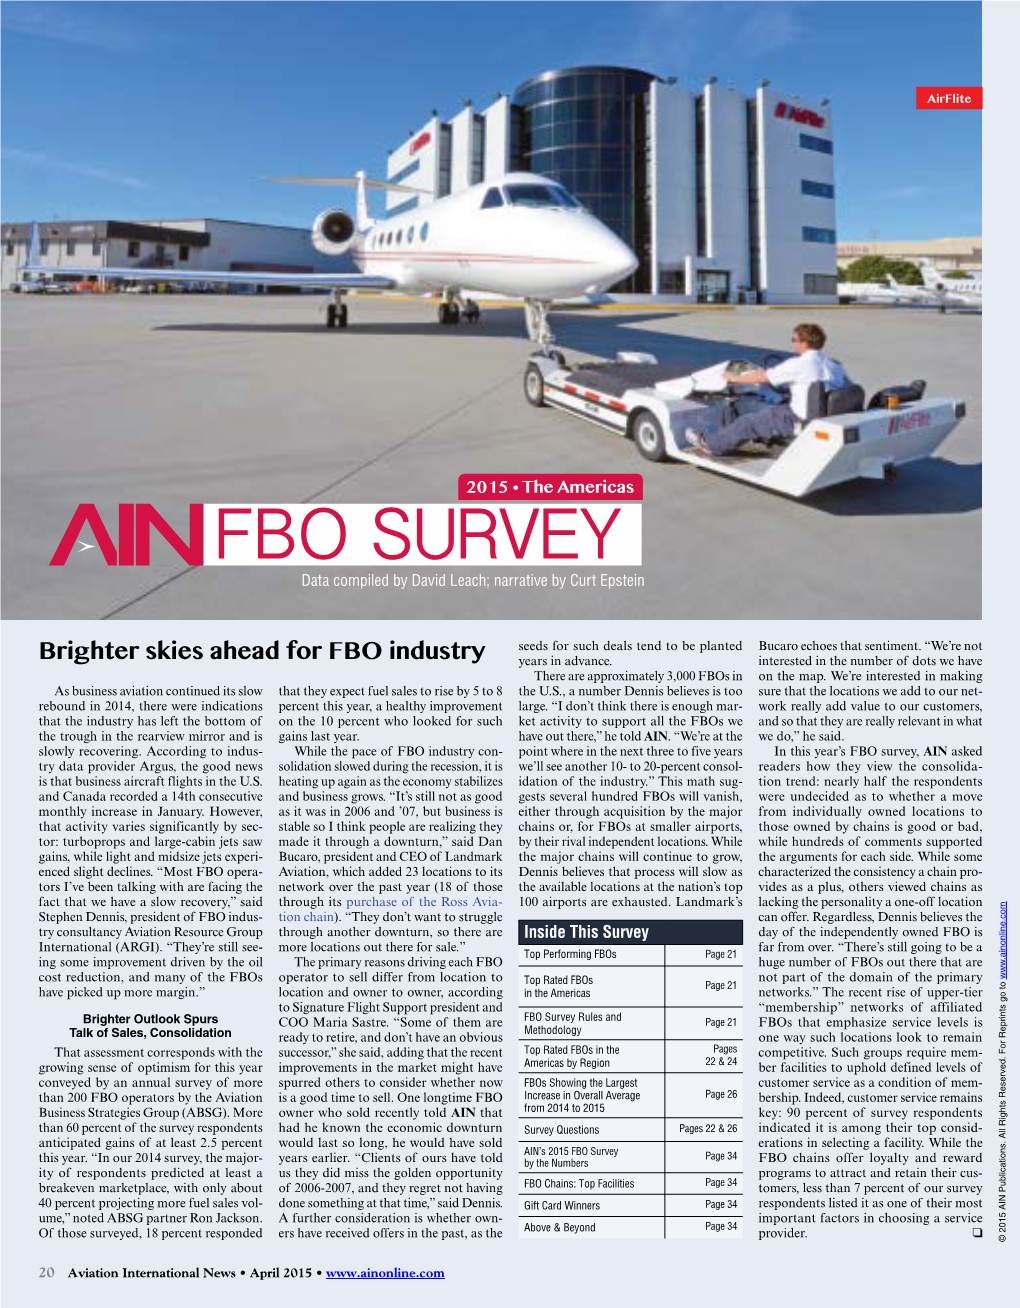 FBO SURVEY Data Compiled by David Leach; Narrative by Curt Epstein